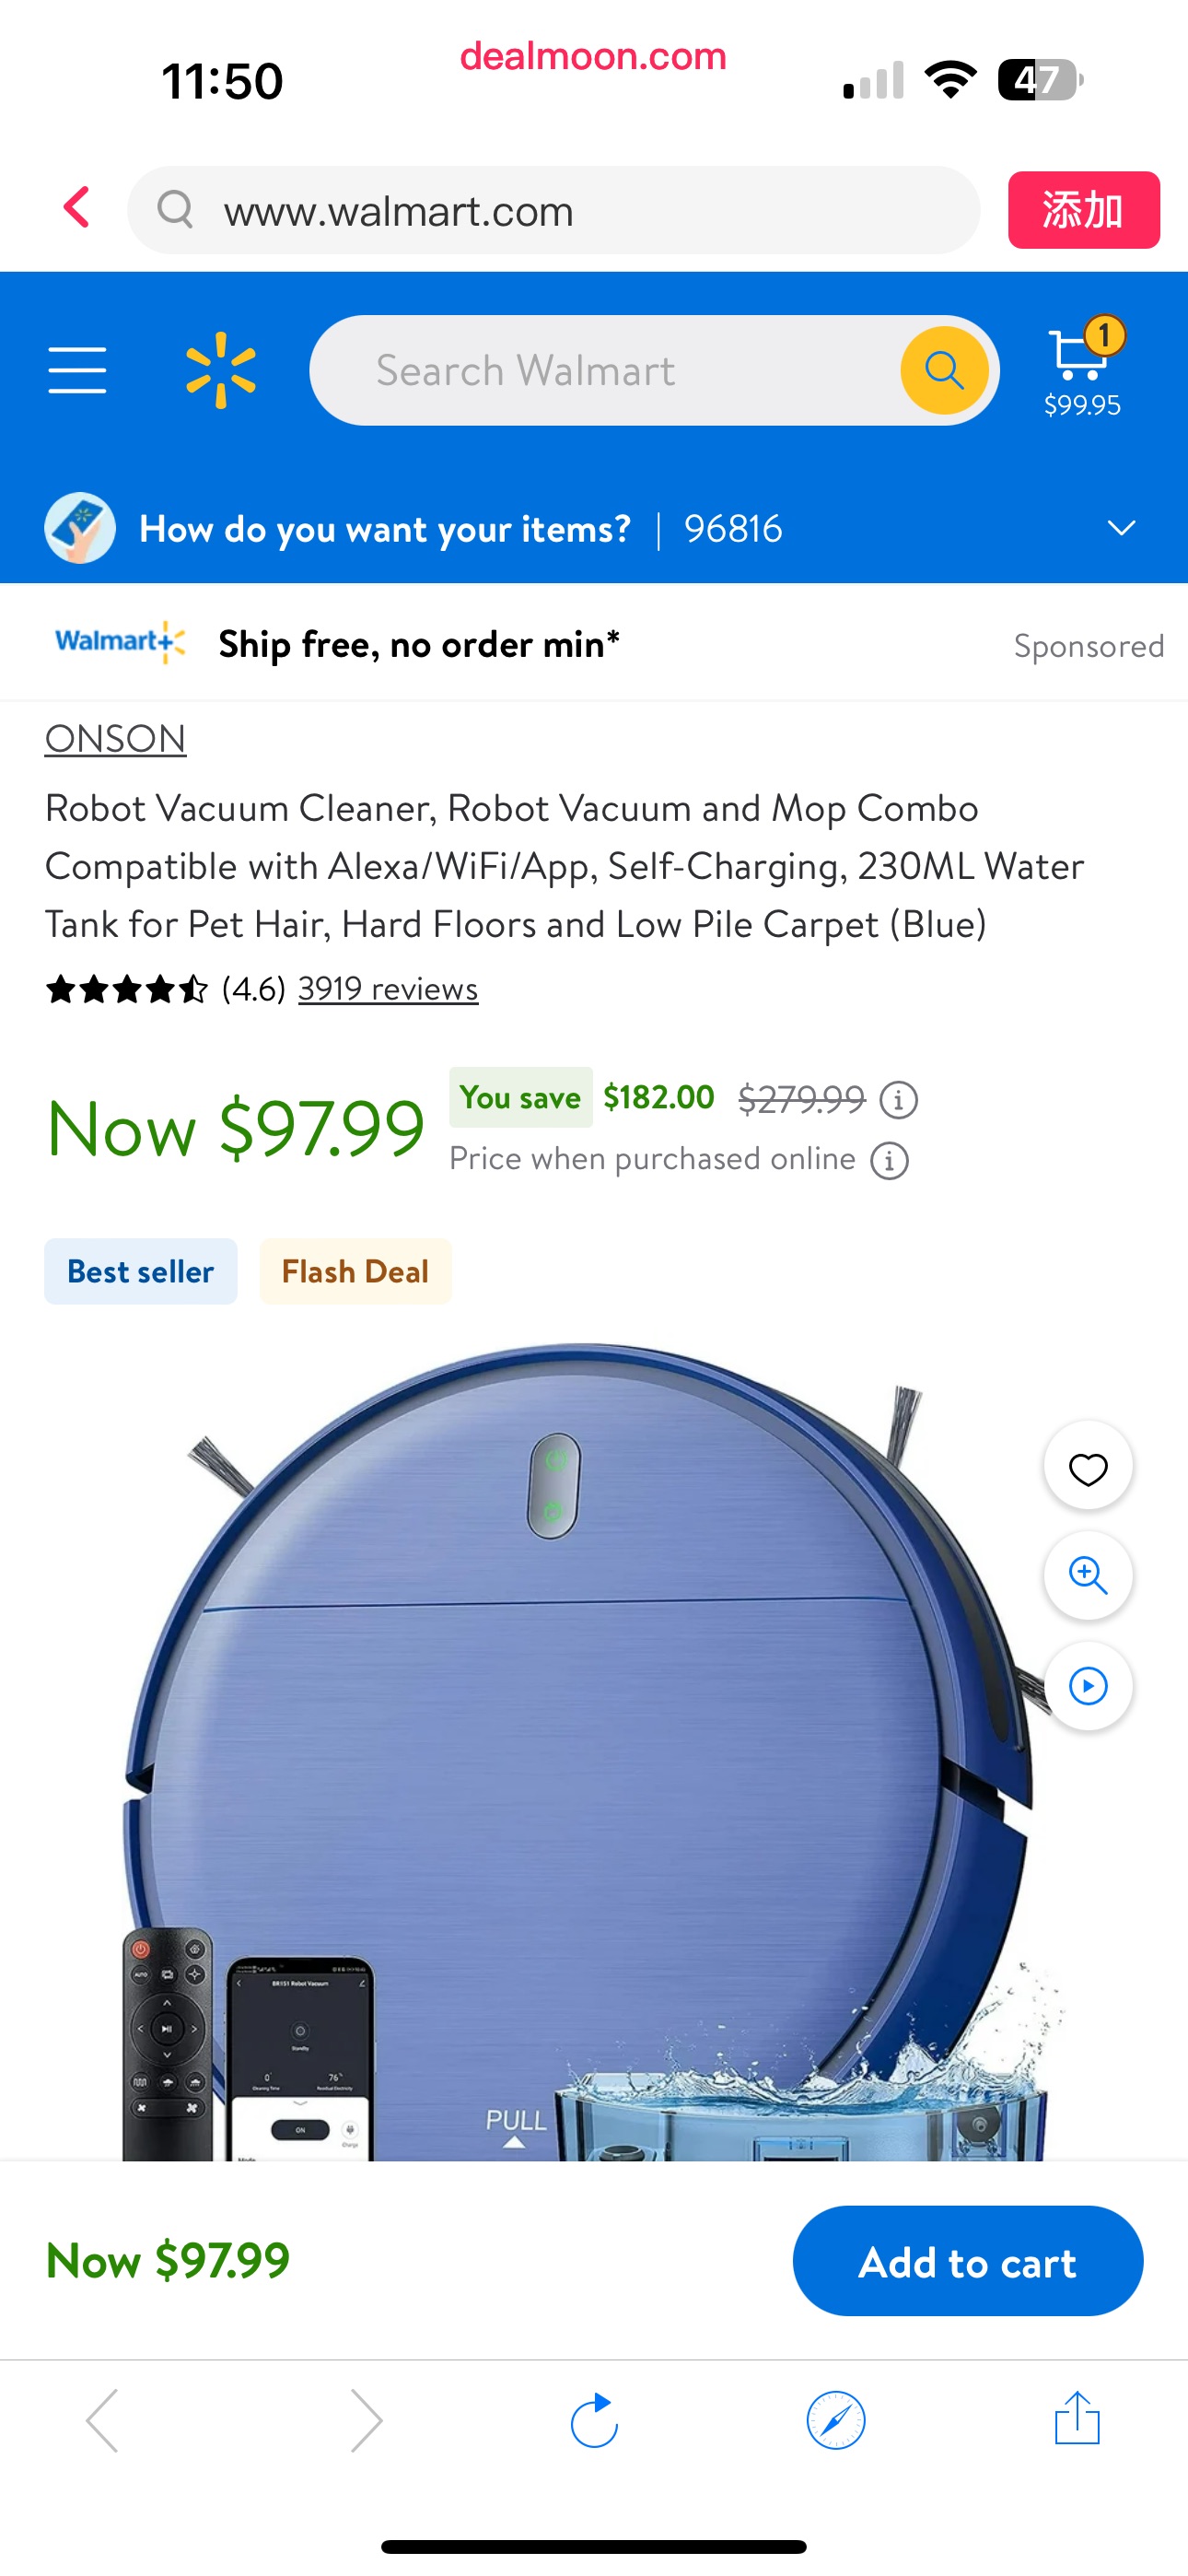 Robot Vacuum Cleaner, Robot Vacuum and Mop Combo Compatible with Alexa/WiFi/App, Self-Charging, 230ML Water Tank for Pet Hair, Hard Floors and Low Pile Carpet (Blue) - Walmart.com智能扫地擦地机器人